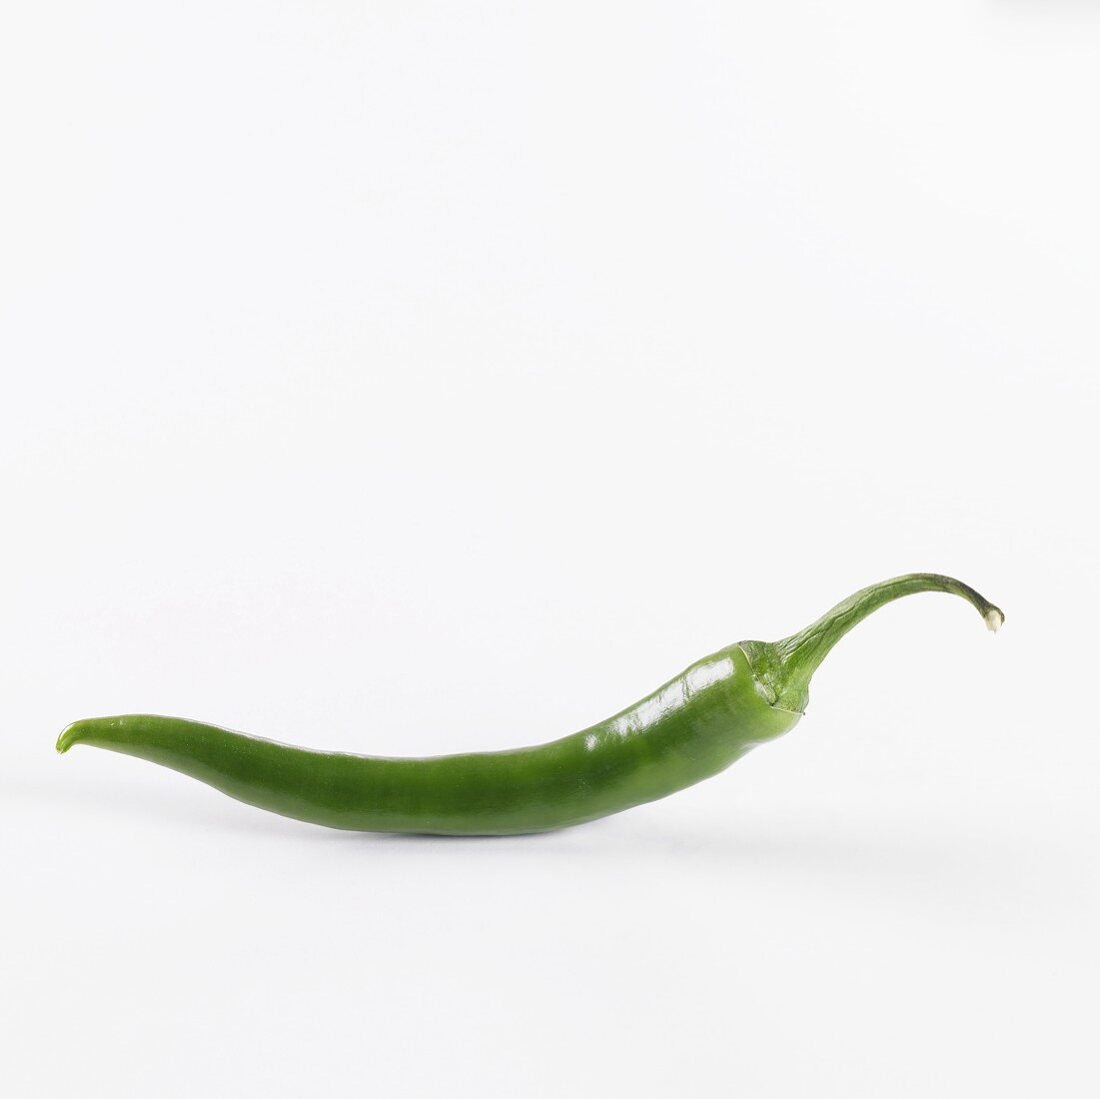 A green chilli against a white background